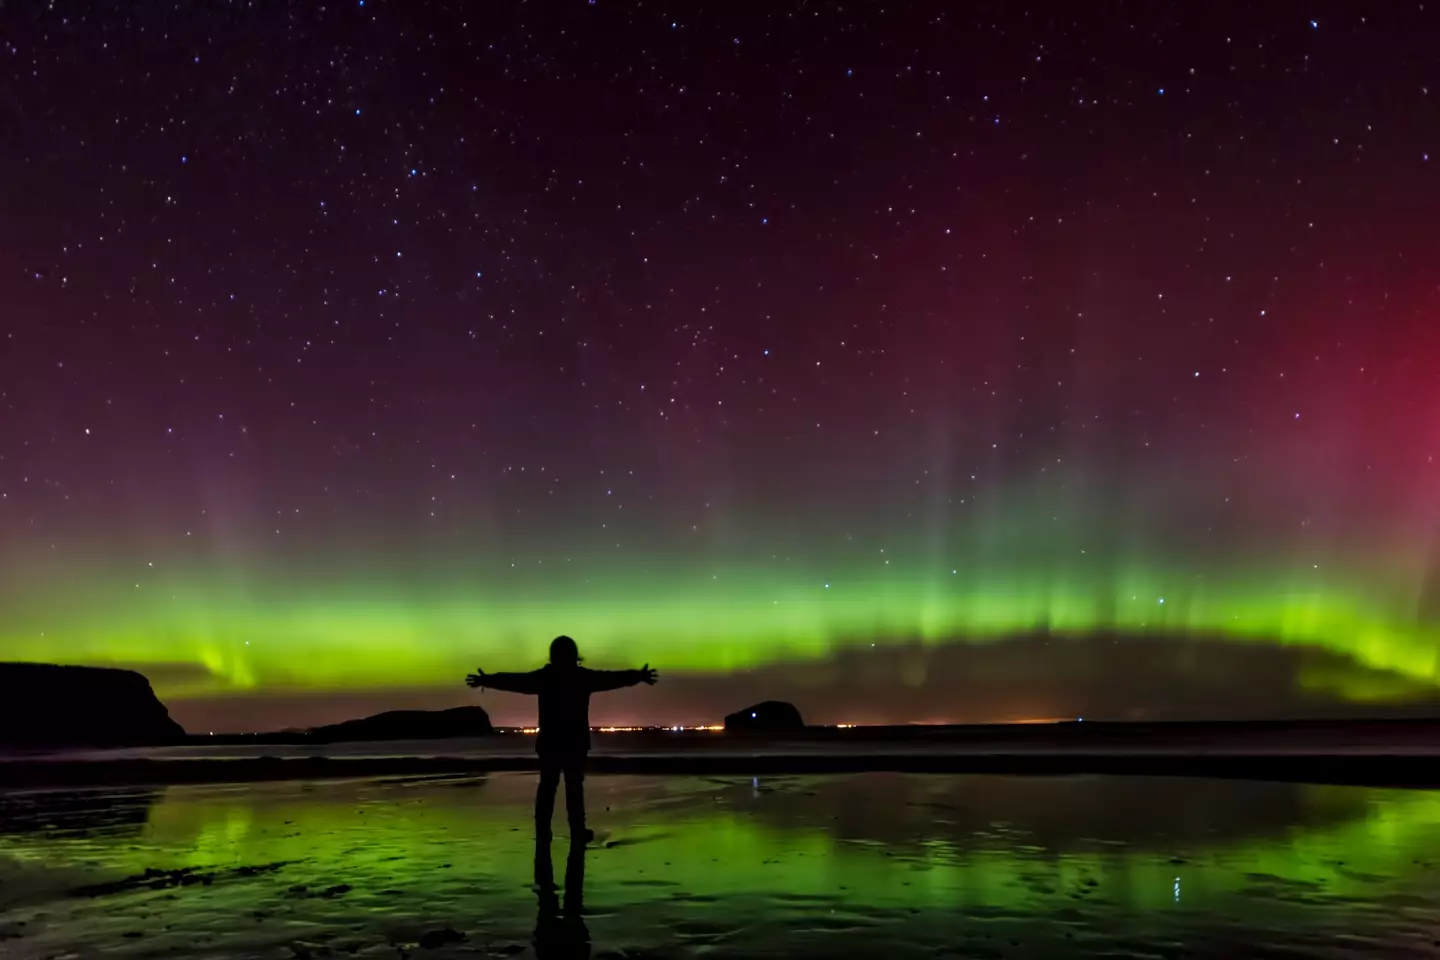 The Met Office says the Northern Lights will be visible from Newcastle up tonight.